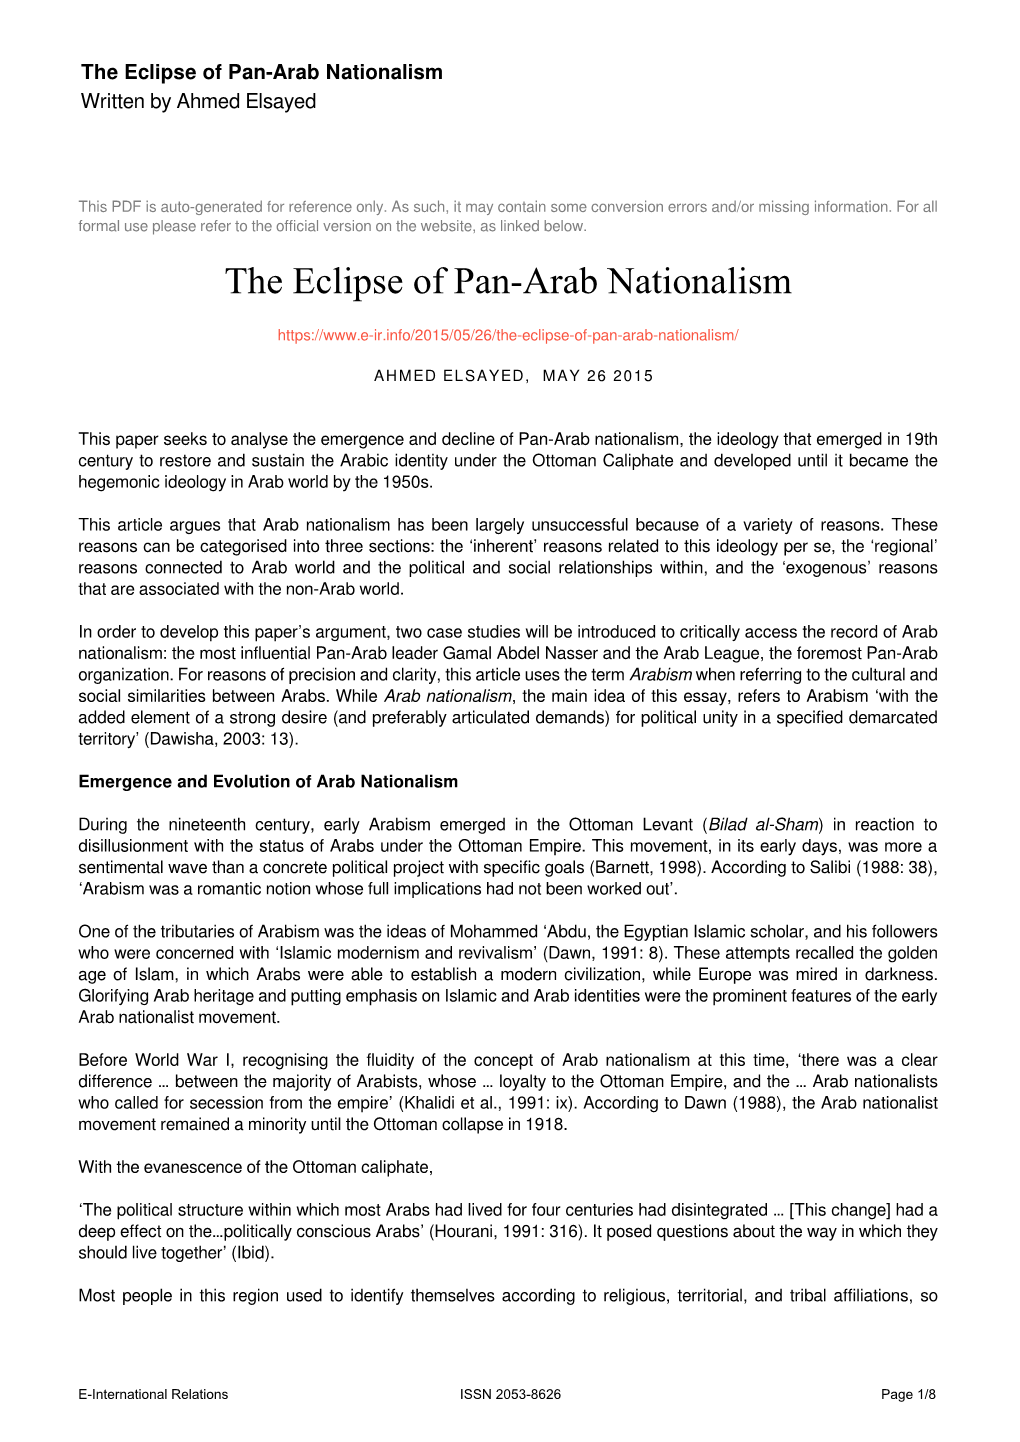 The Eclipse of Pan-Arab Nationalism Written by Ahmed Elsayed